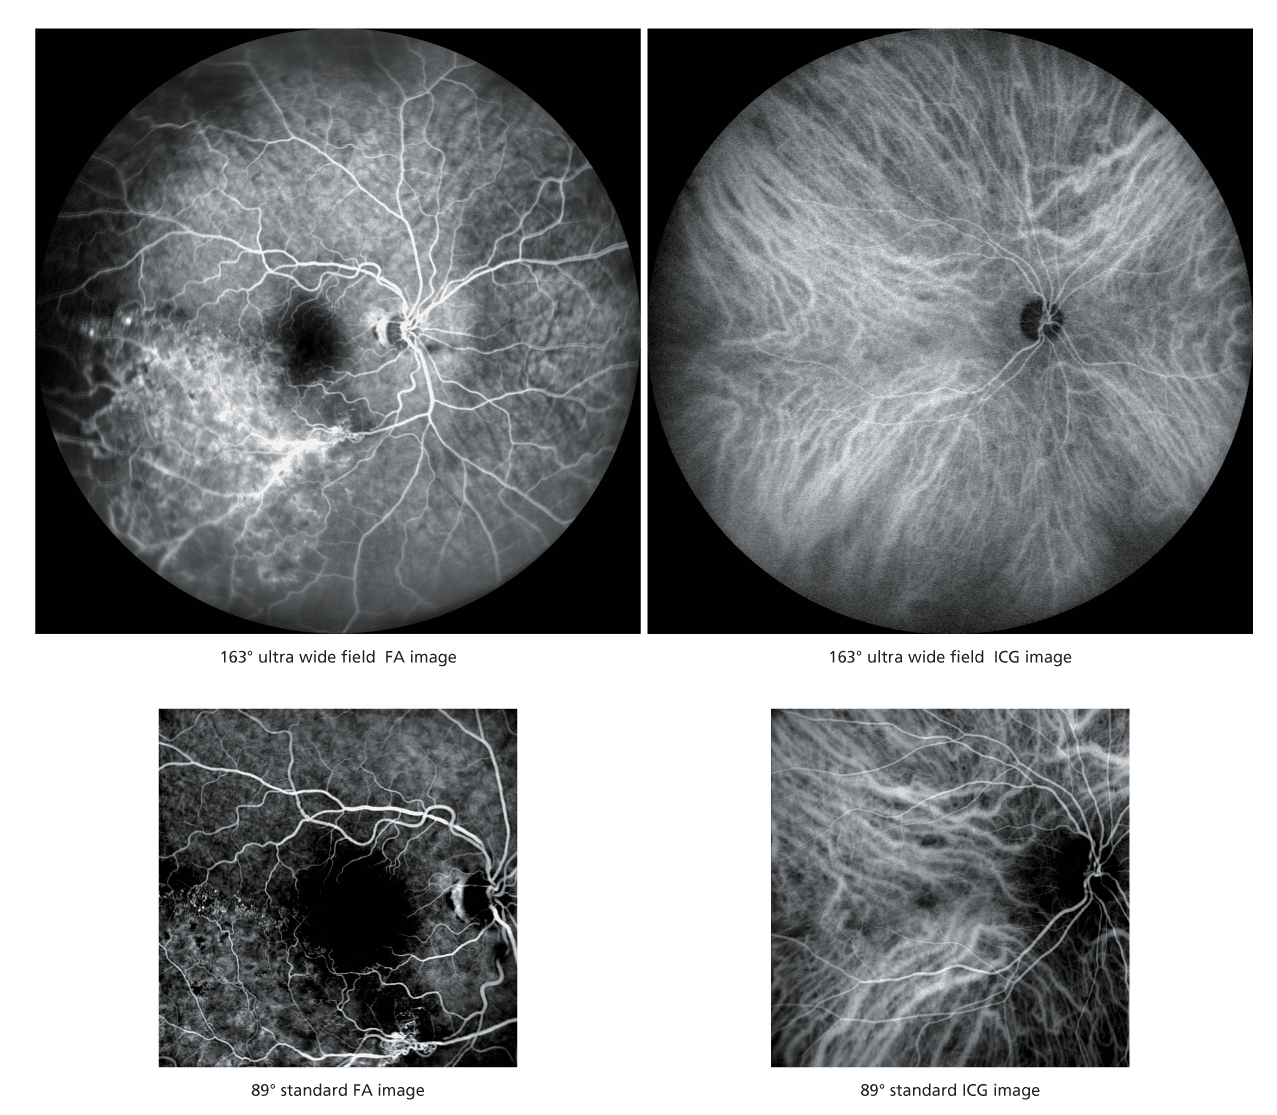 The Image Displays Four Grayscale Medical Images Showing Retinal Scans. The Top-Left And Top-Right Images Are 163° Ultra-Wide Field Fa And Icg Images From Nidek, Respectively. The Bottom-Left And Bottom-Right Images Are 89° Standard Fa And Icg Images, Respectively, Showcasing Intricate Retinal Patterns And Blood Vessels.